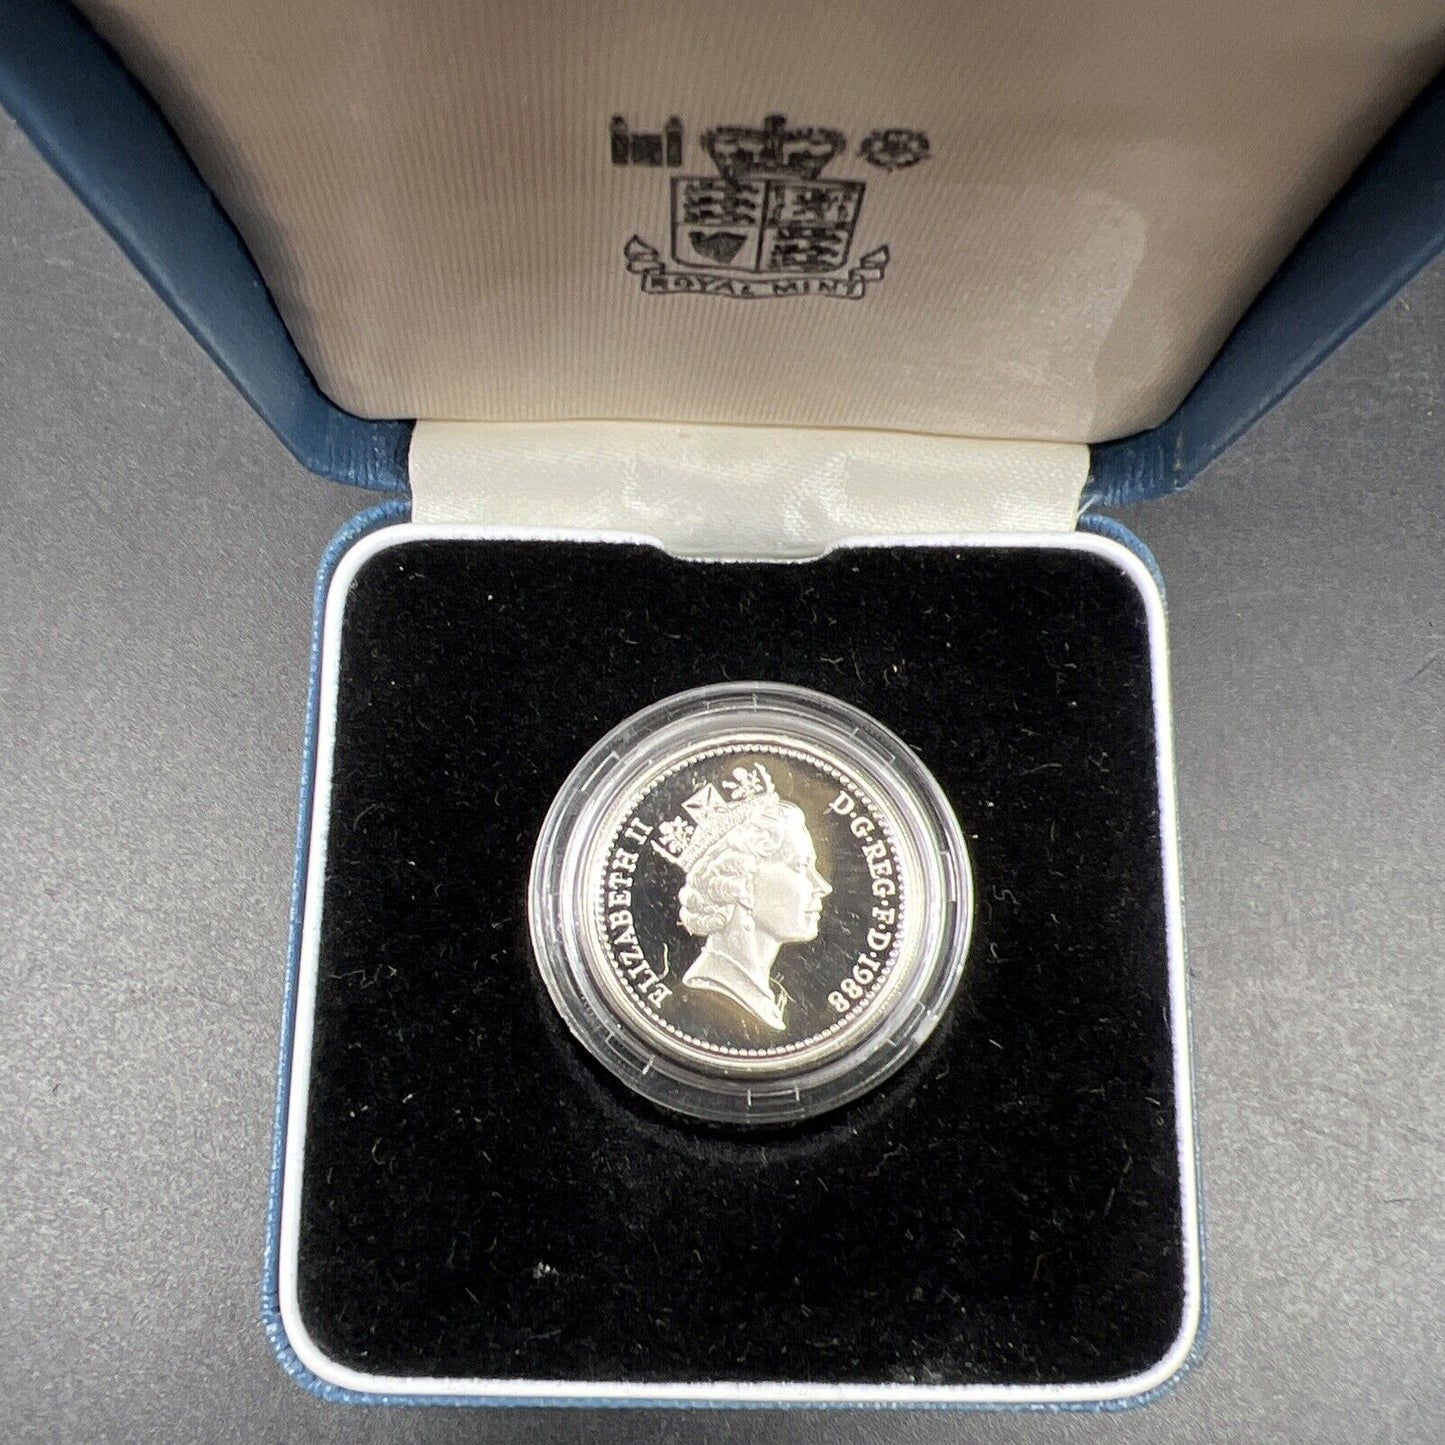 1988 UK Sterling Silver Proof One Pound Coin w/ Box & COA Neat Toning